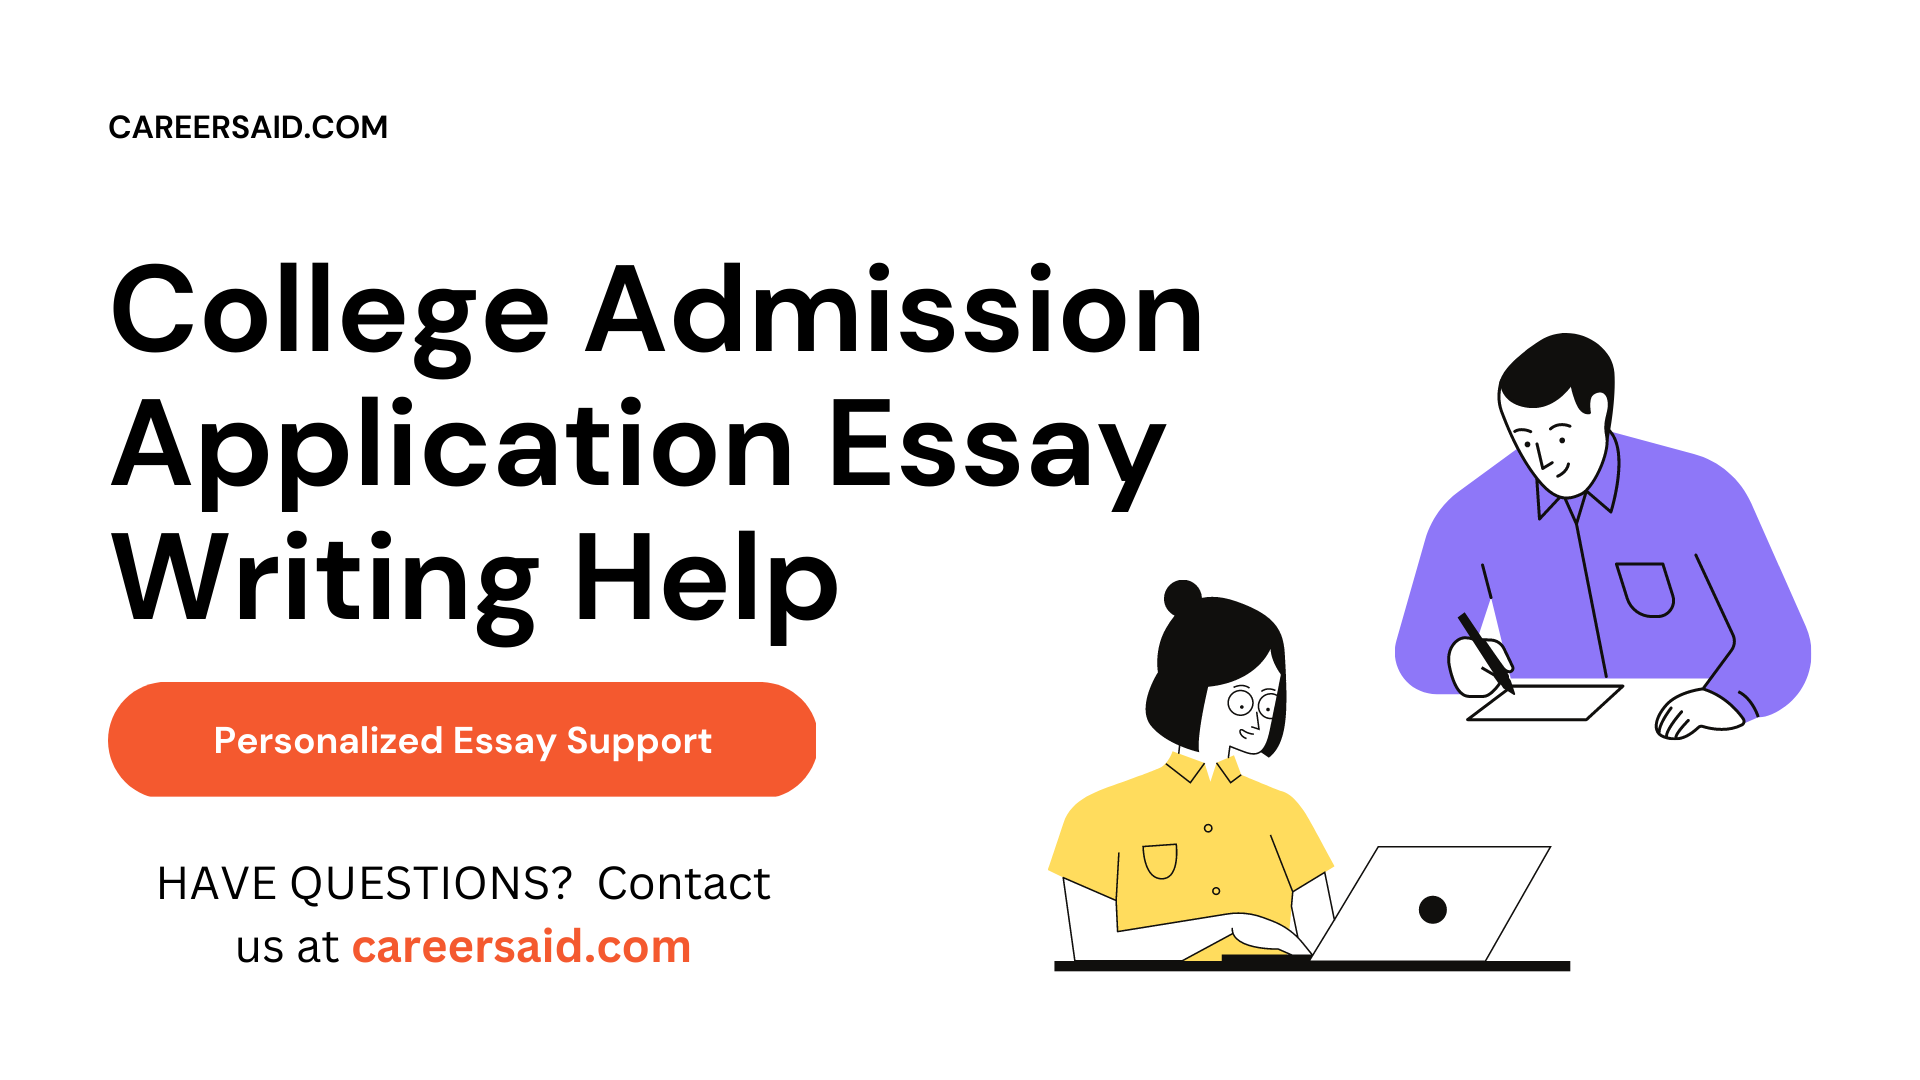 College Admission Application Essay Writing Help